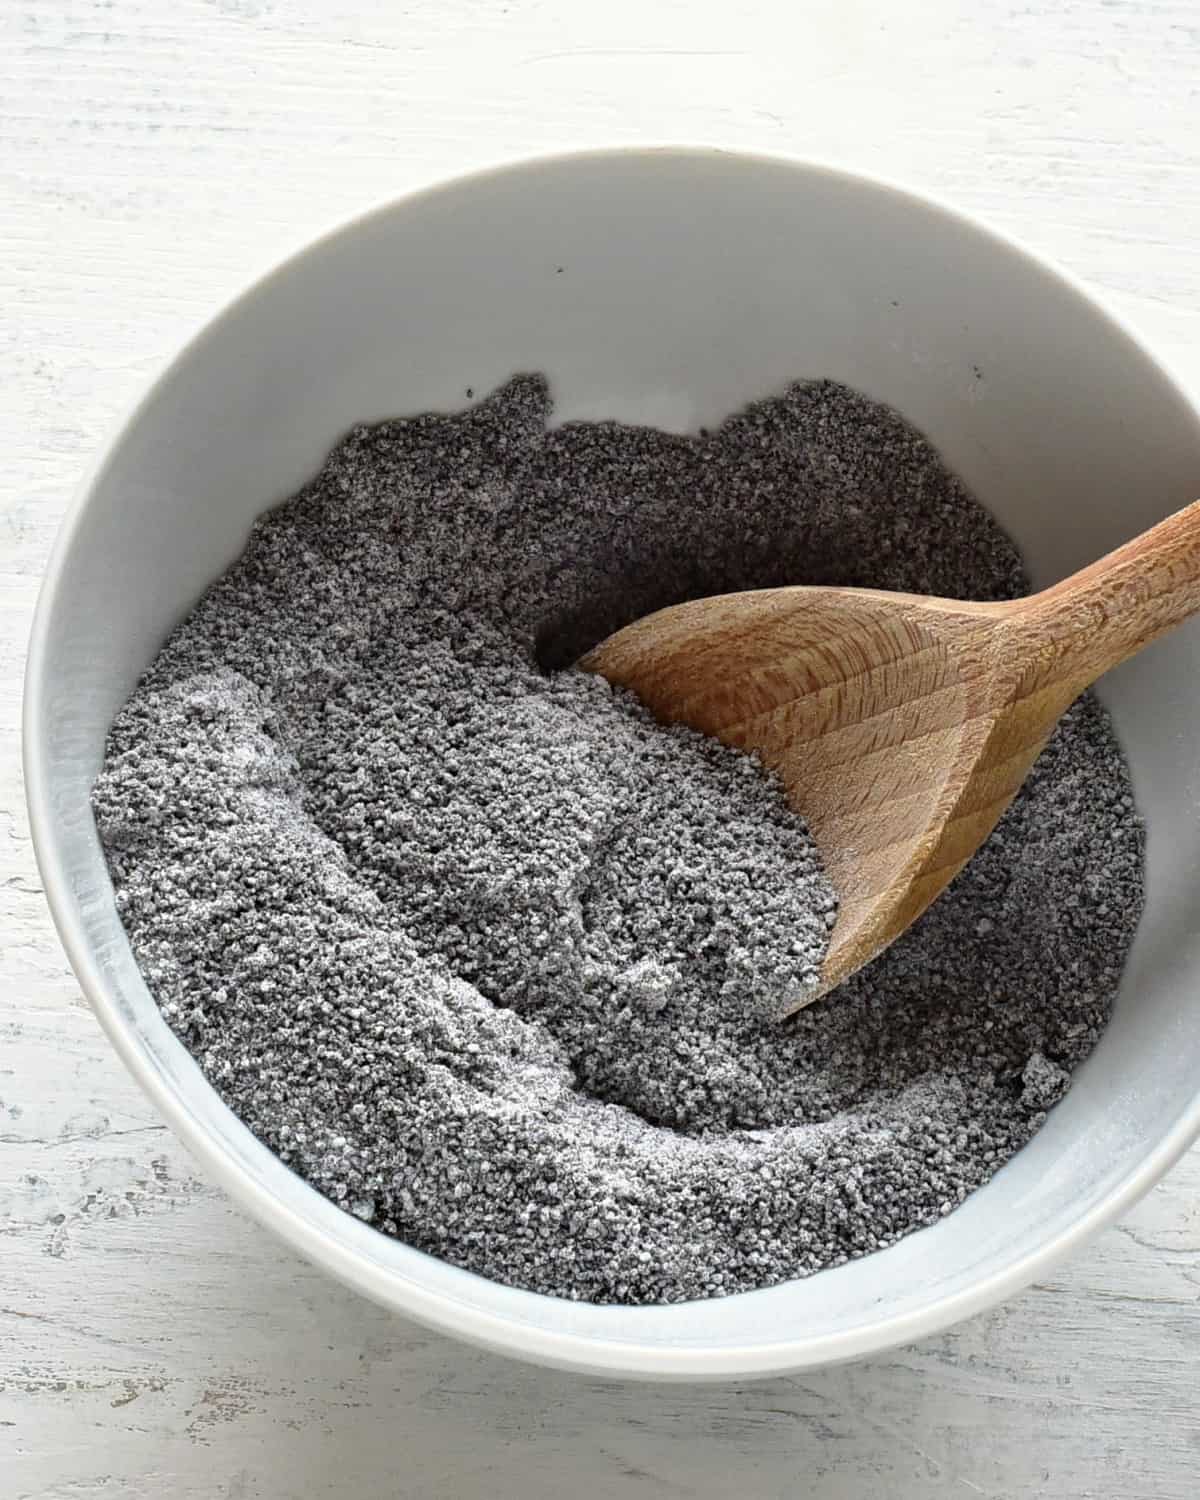 poppy seed with powdered sugar mixture